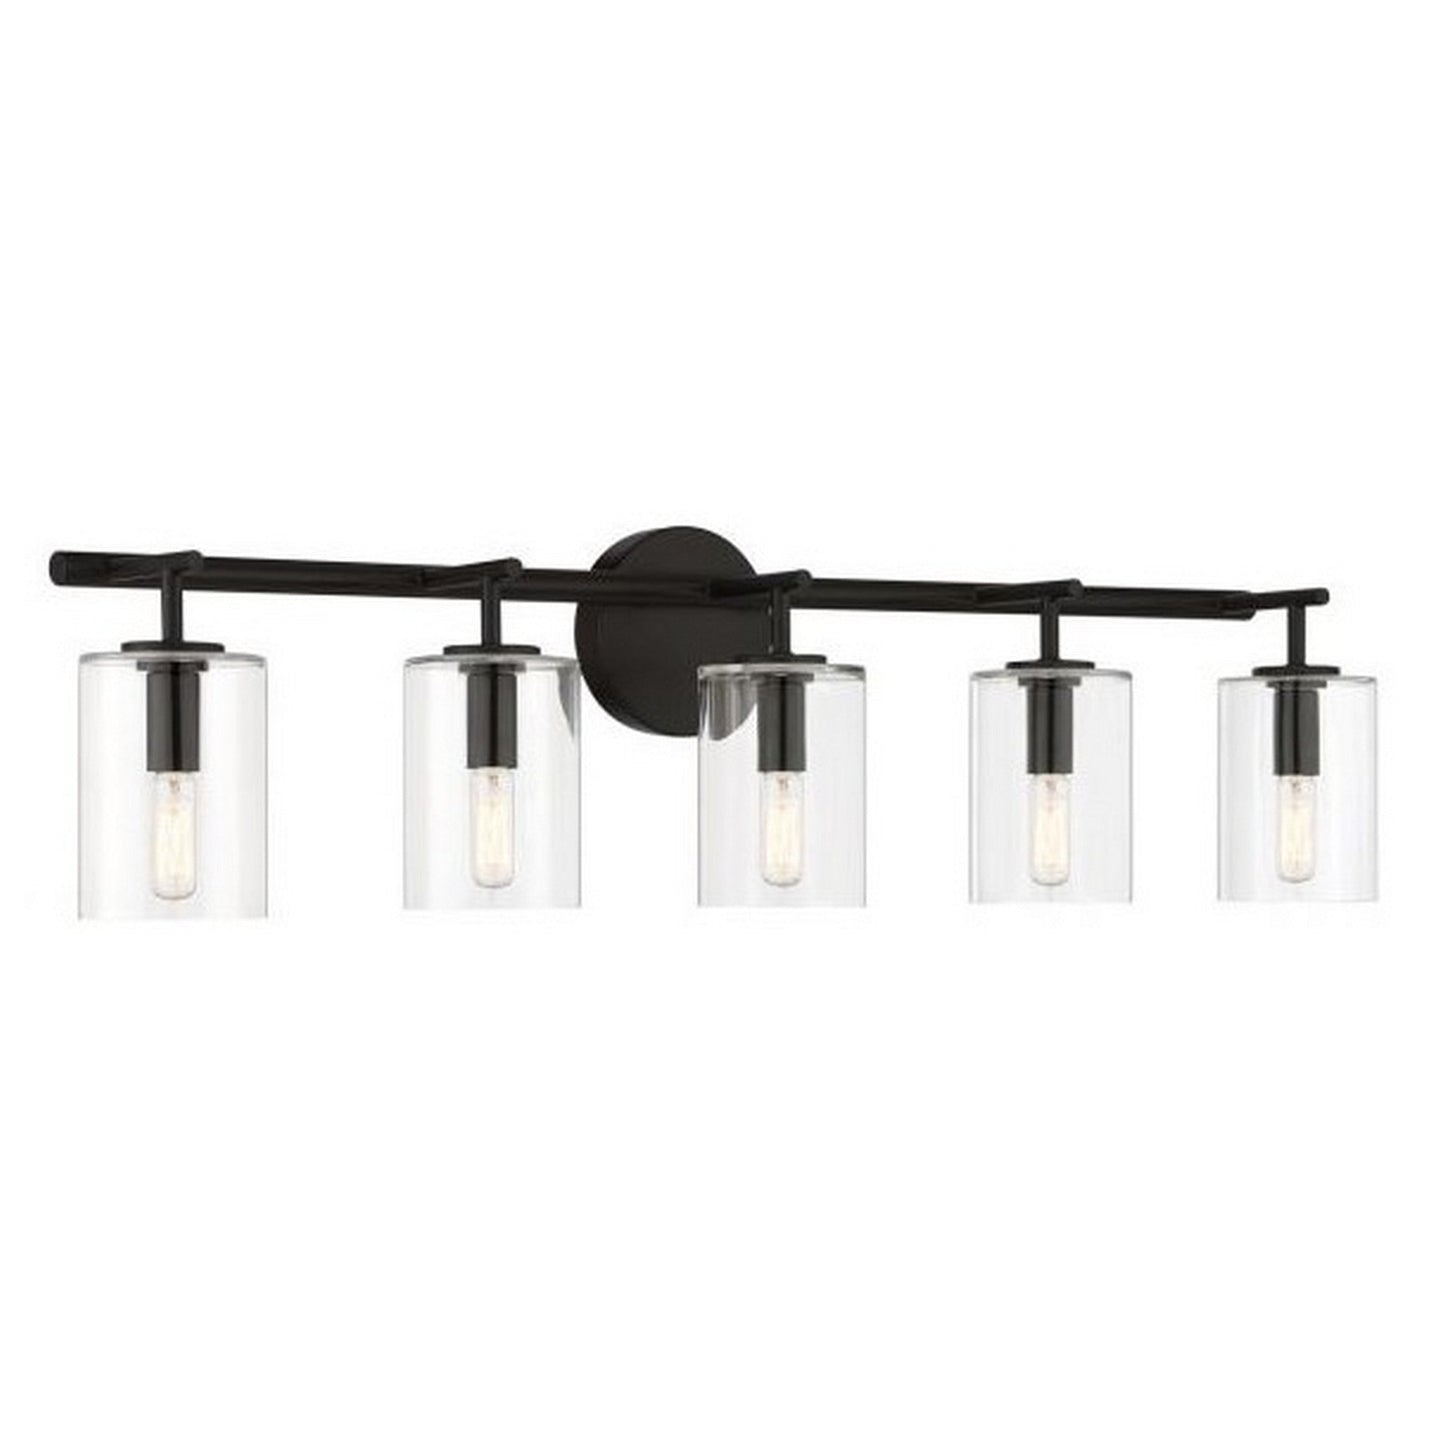 Craftmade Hailie 35" 5-Light Flat Black Vanity Light With Clear Glass Cylinder Shades